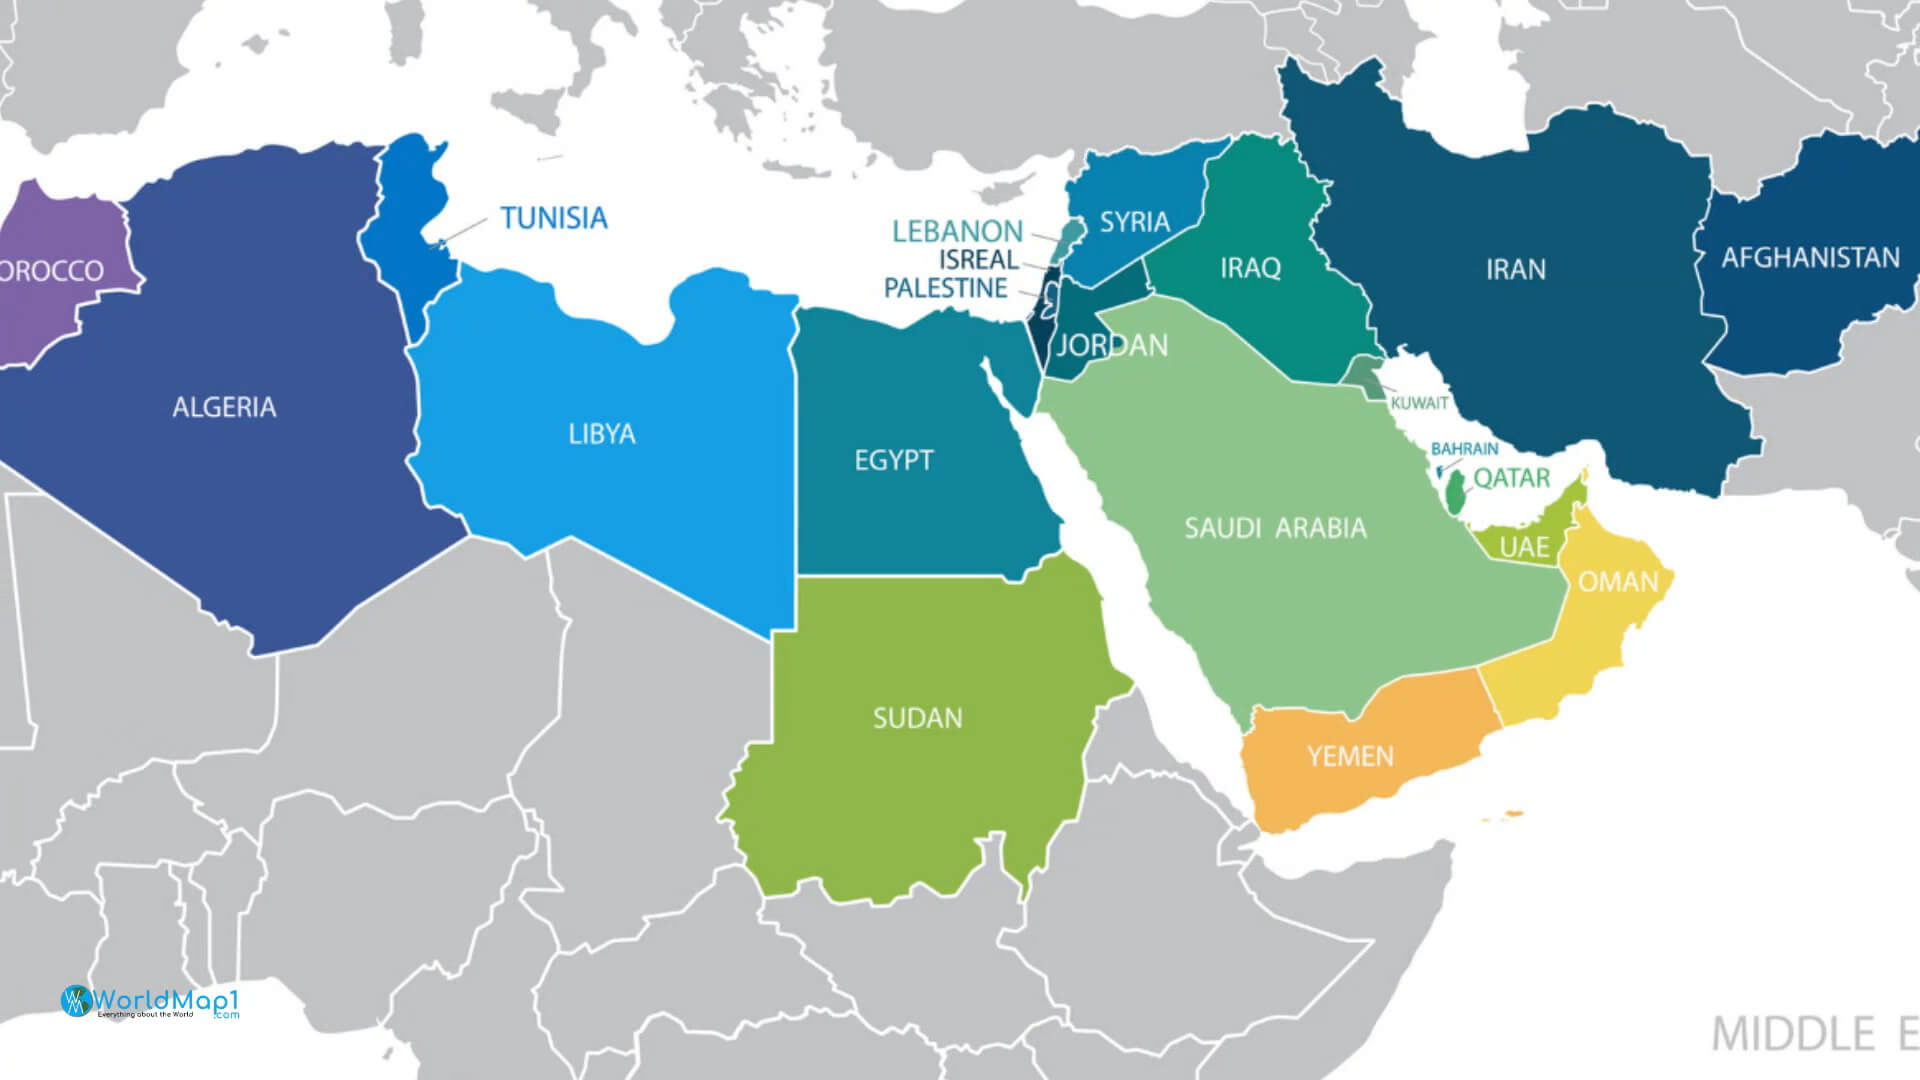 Northern Africa and Middle East Countries Map with Qatar